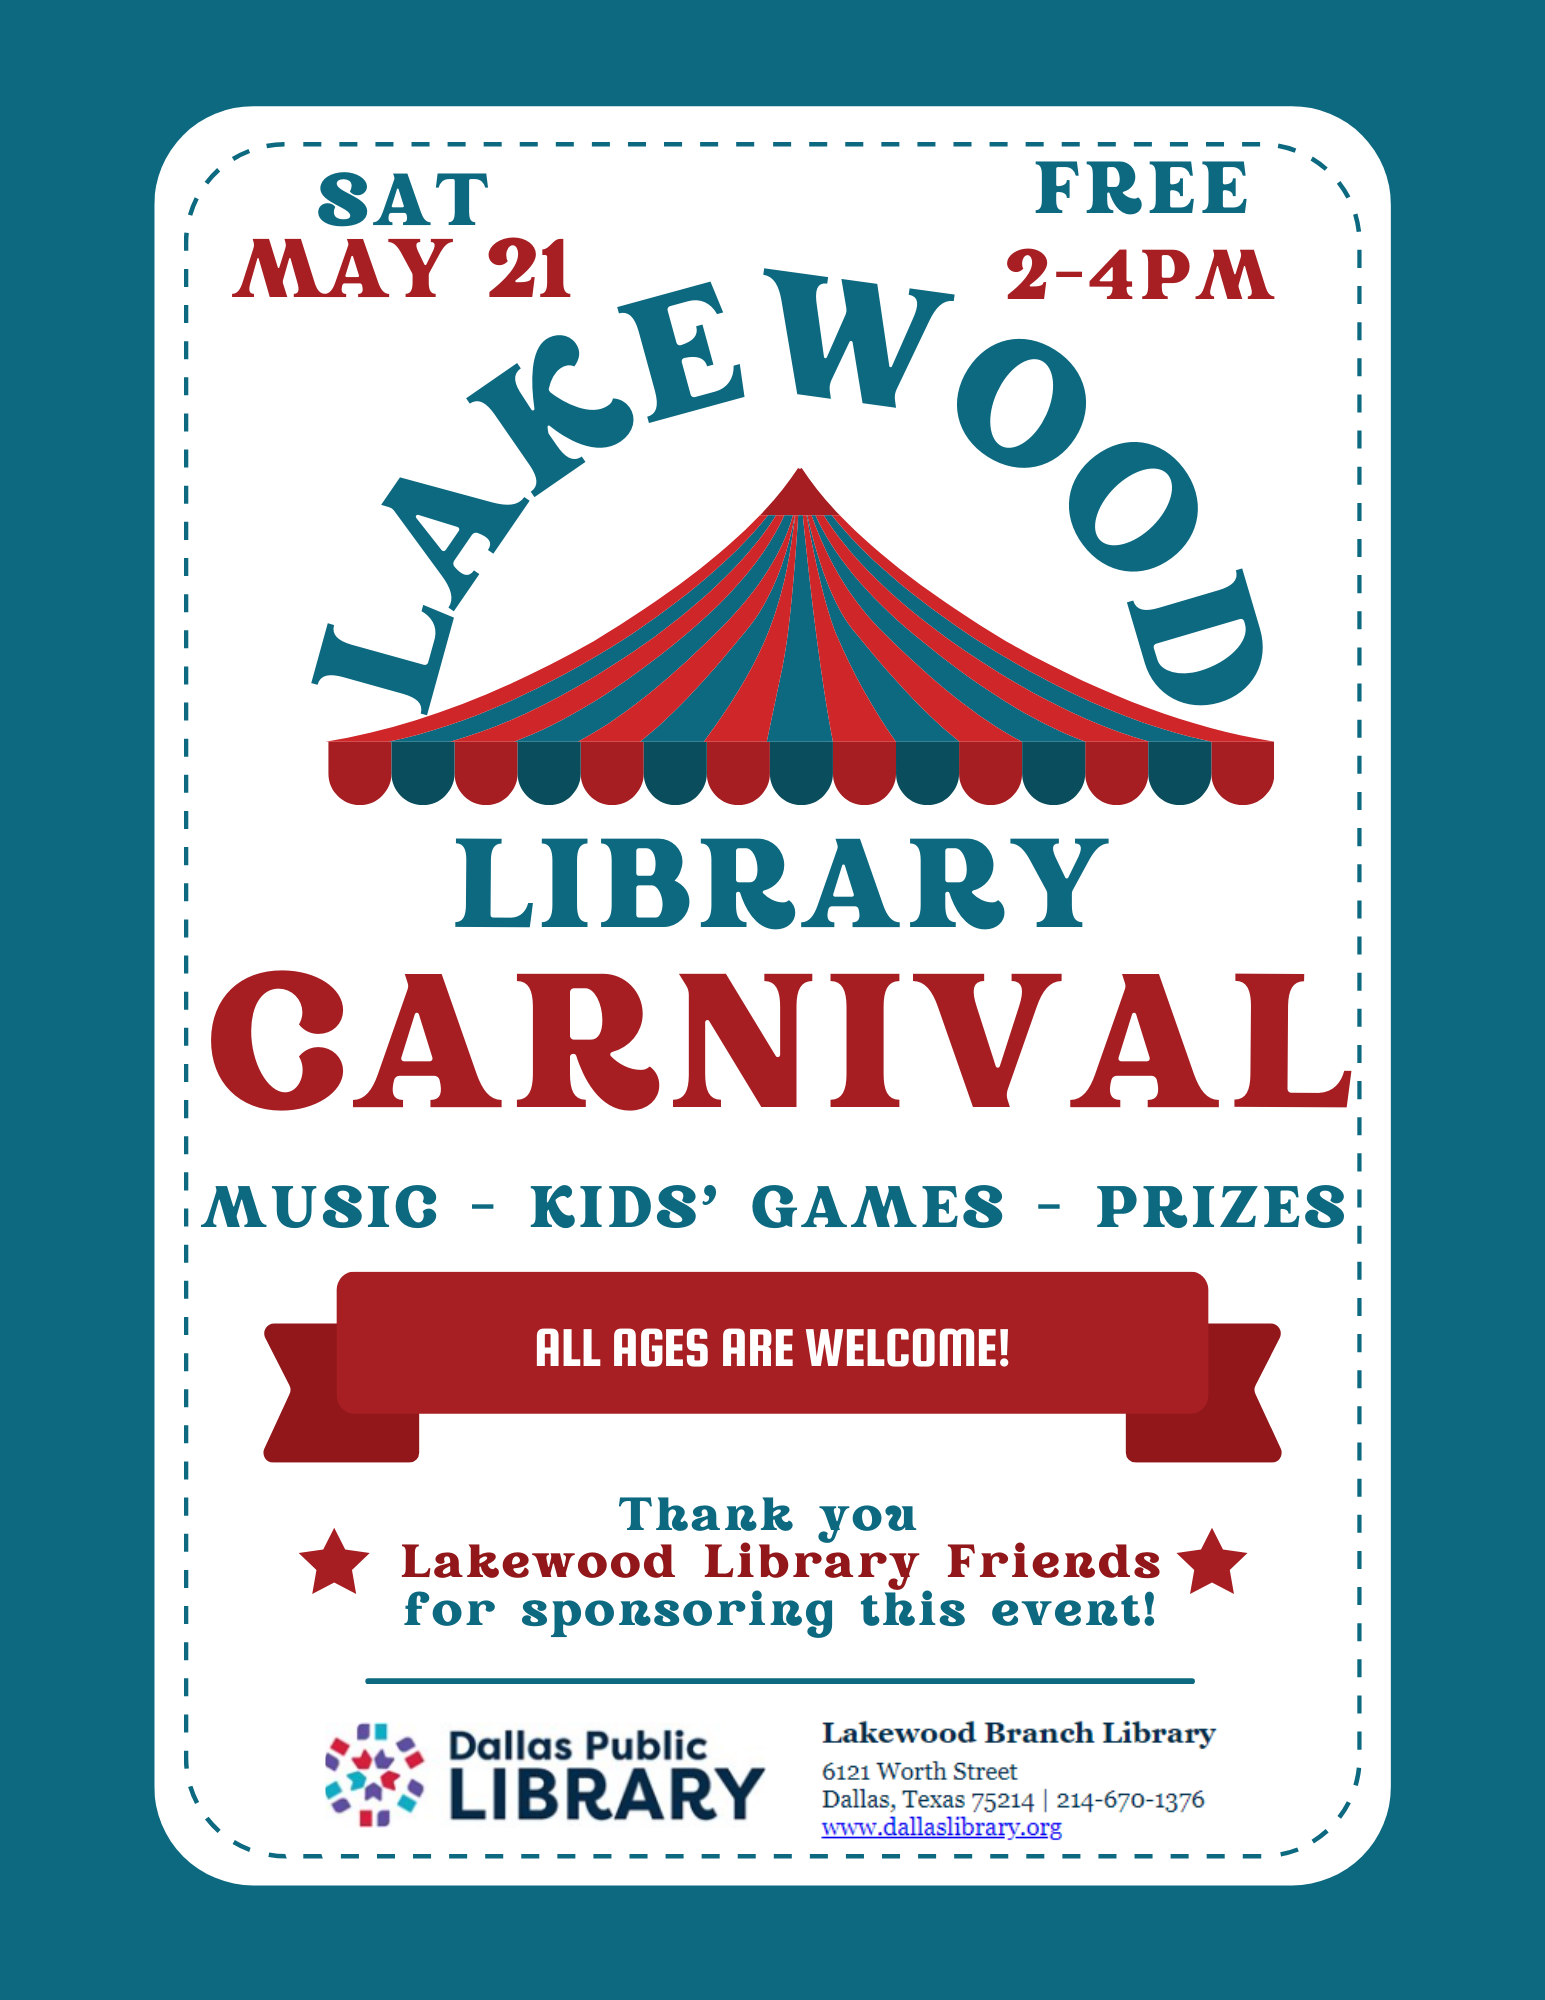 Saturday, May 21 - Lakewood Branch Library Carnival 2-4pm all are welcome